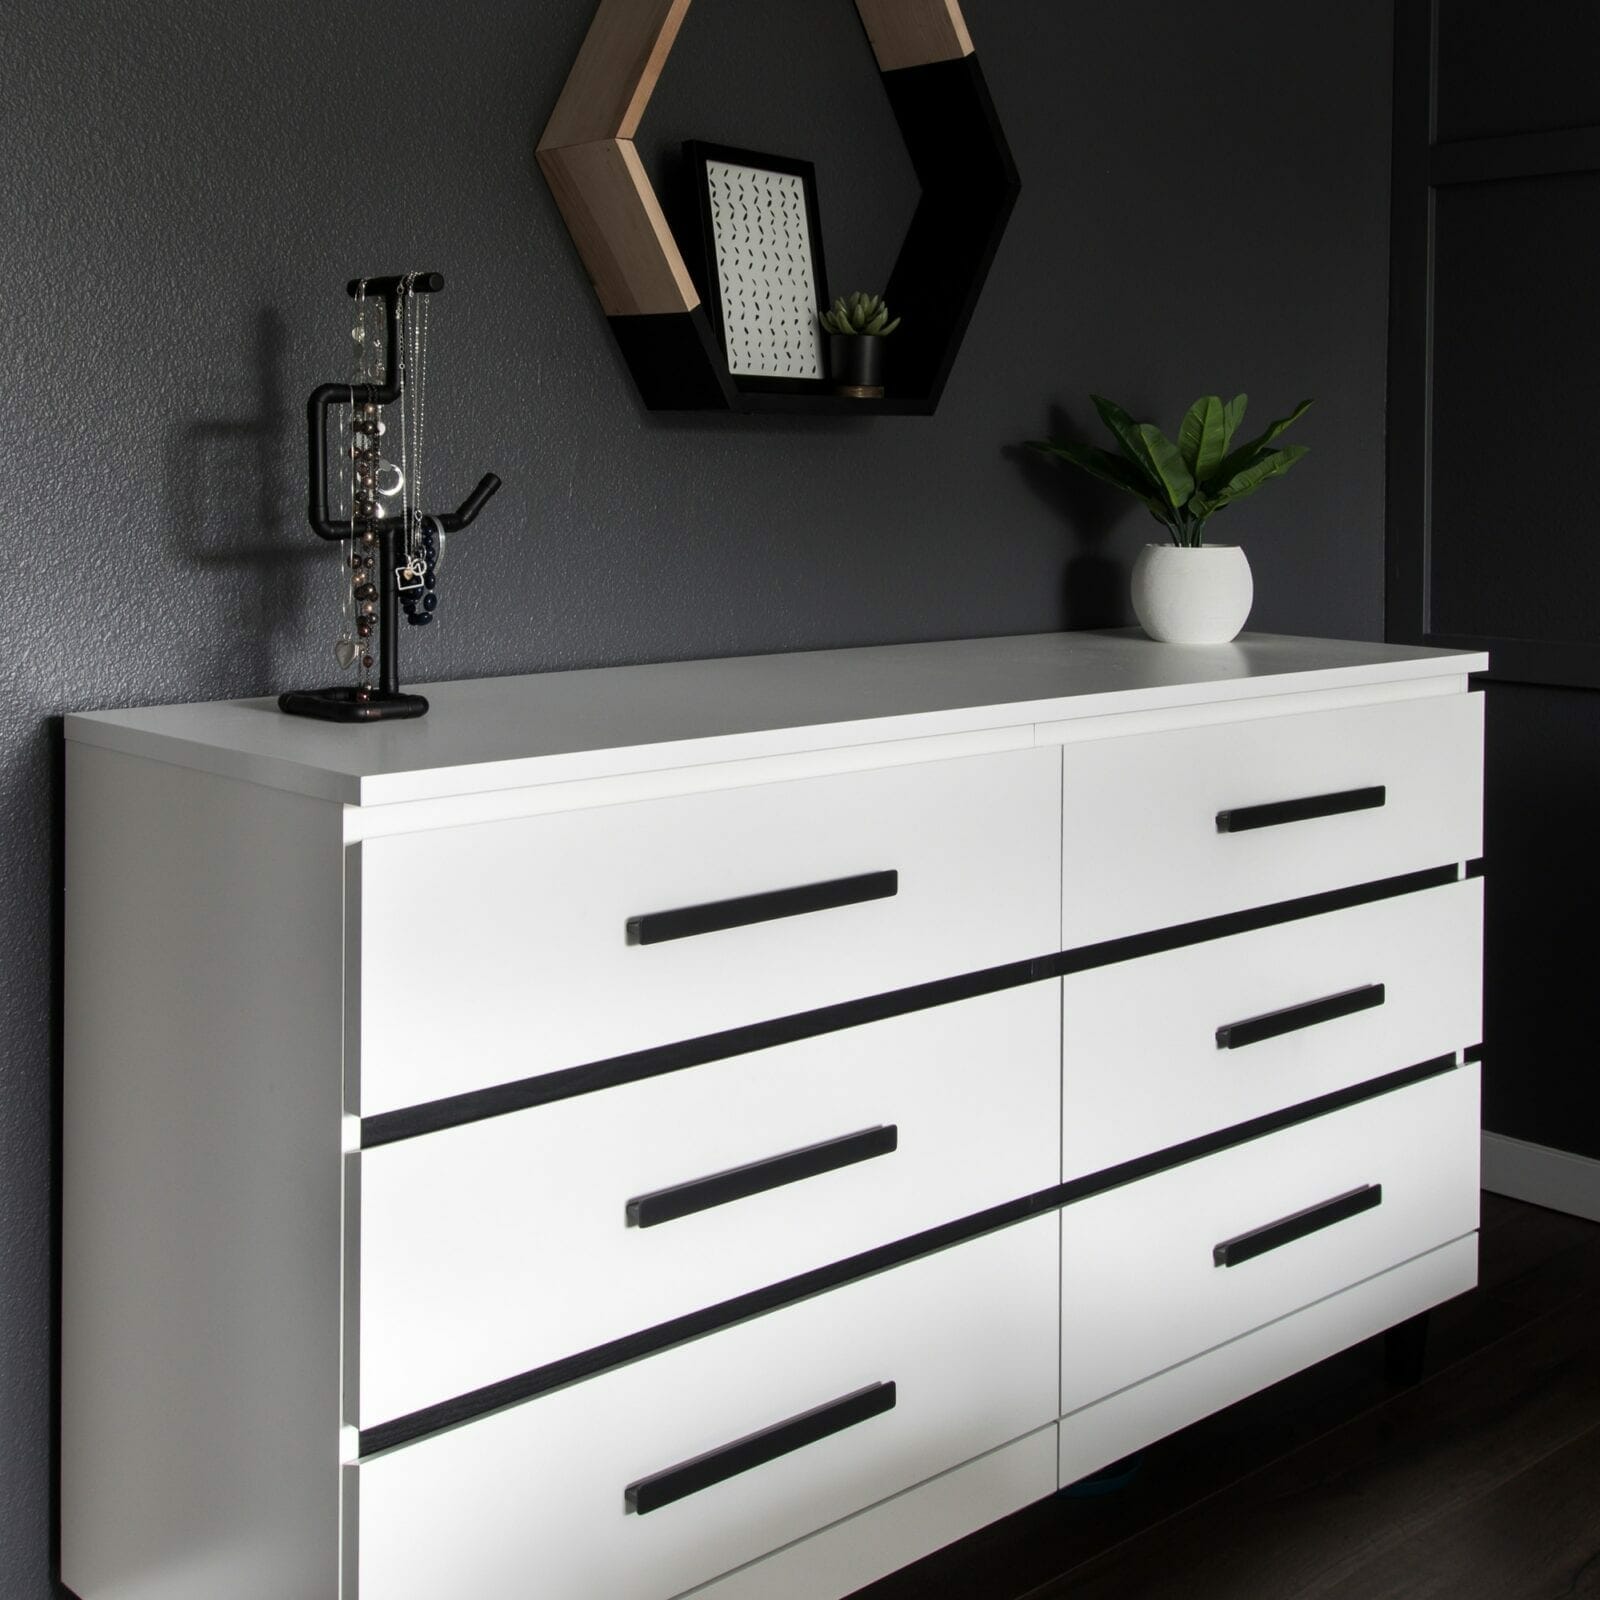 Ikea Malm Dresser Makeover, Ikea Dresser With See Through Drawers